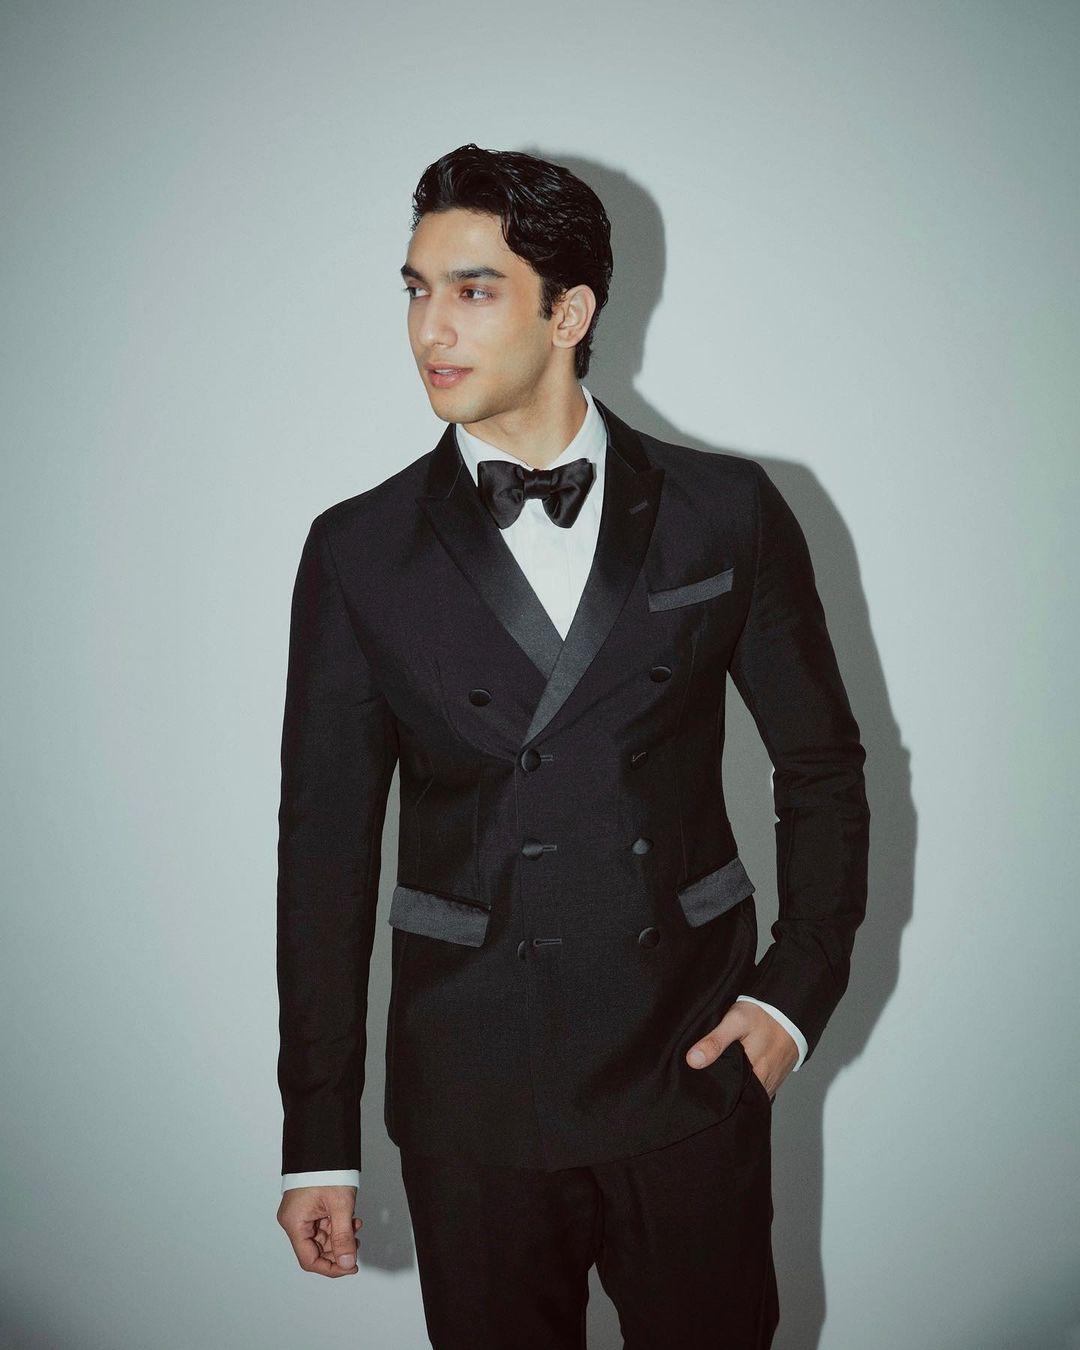 Vedang has mastered the art of donning a tuxedo flawlessly. Every detail is spot on: the bowtie is perfectly angled, the coat's seams are crisp and straight, and his trousers are impeccably tailored. The entire ensemble is a visual delight